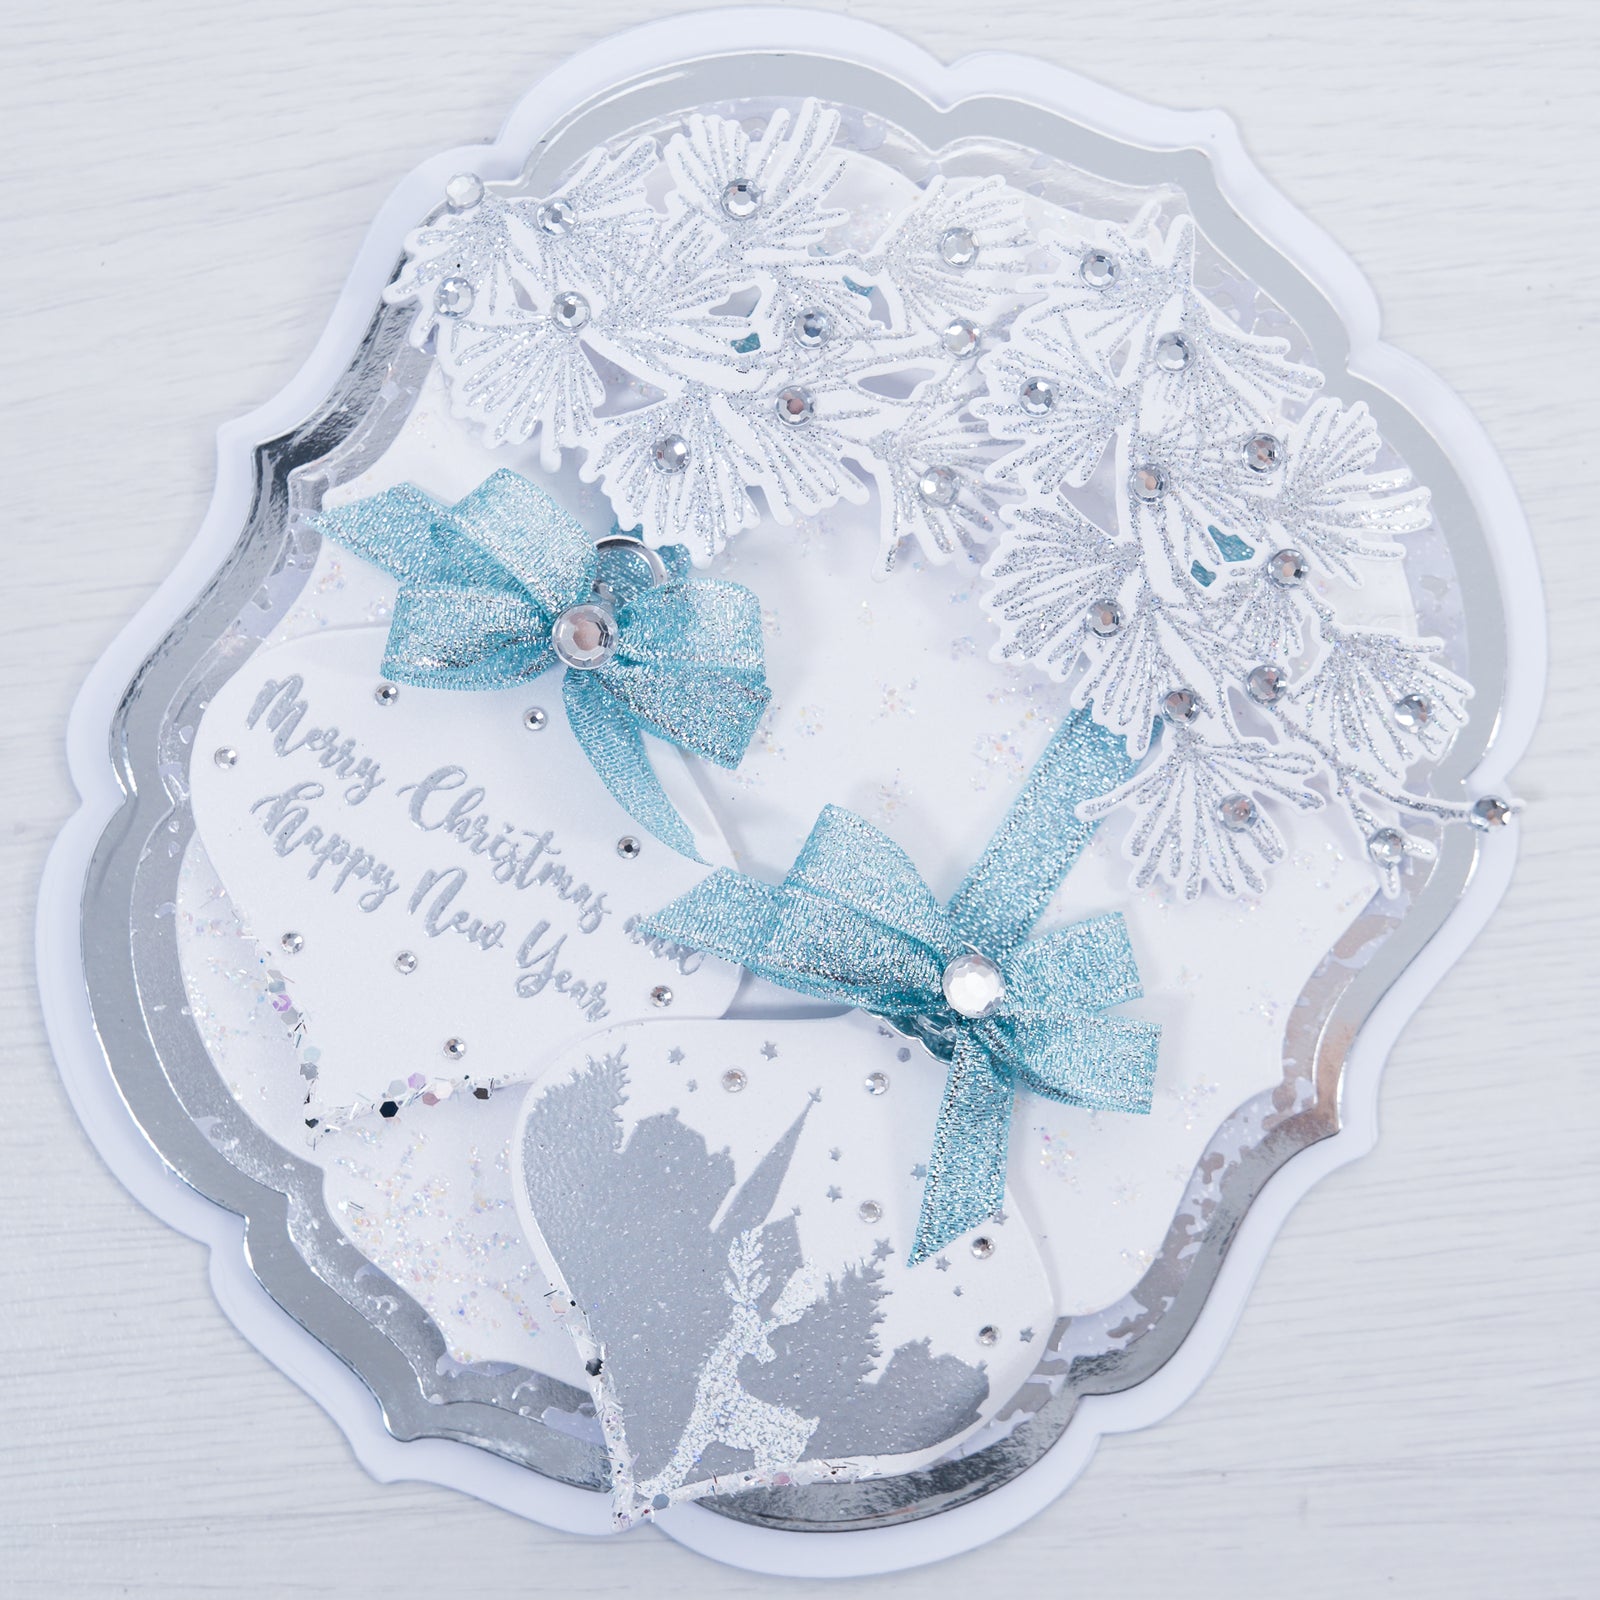 Learn how to make this fancy easel style Christmas card. This beautiful blue and silver toned card features crystal encrusted foliage and snow scene baubles with luxe ribbon bows.